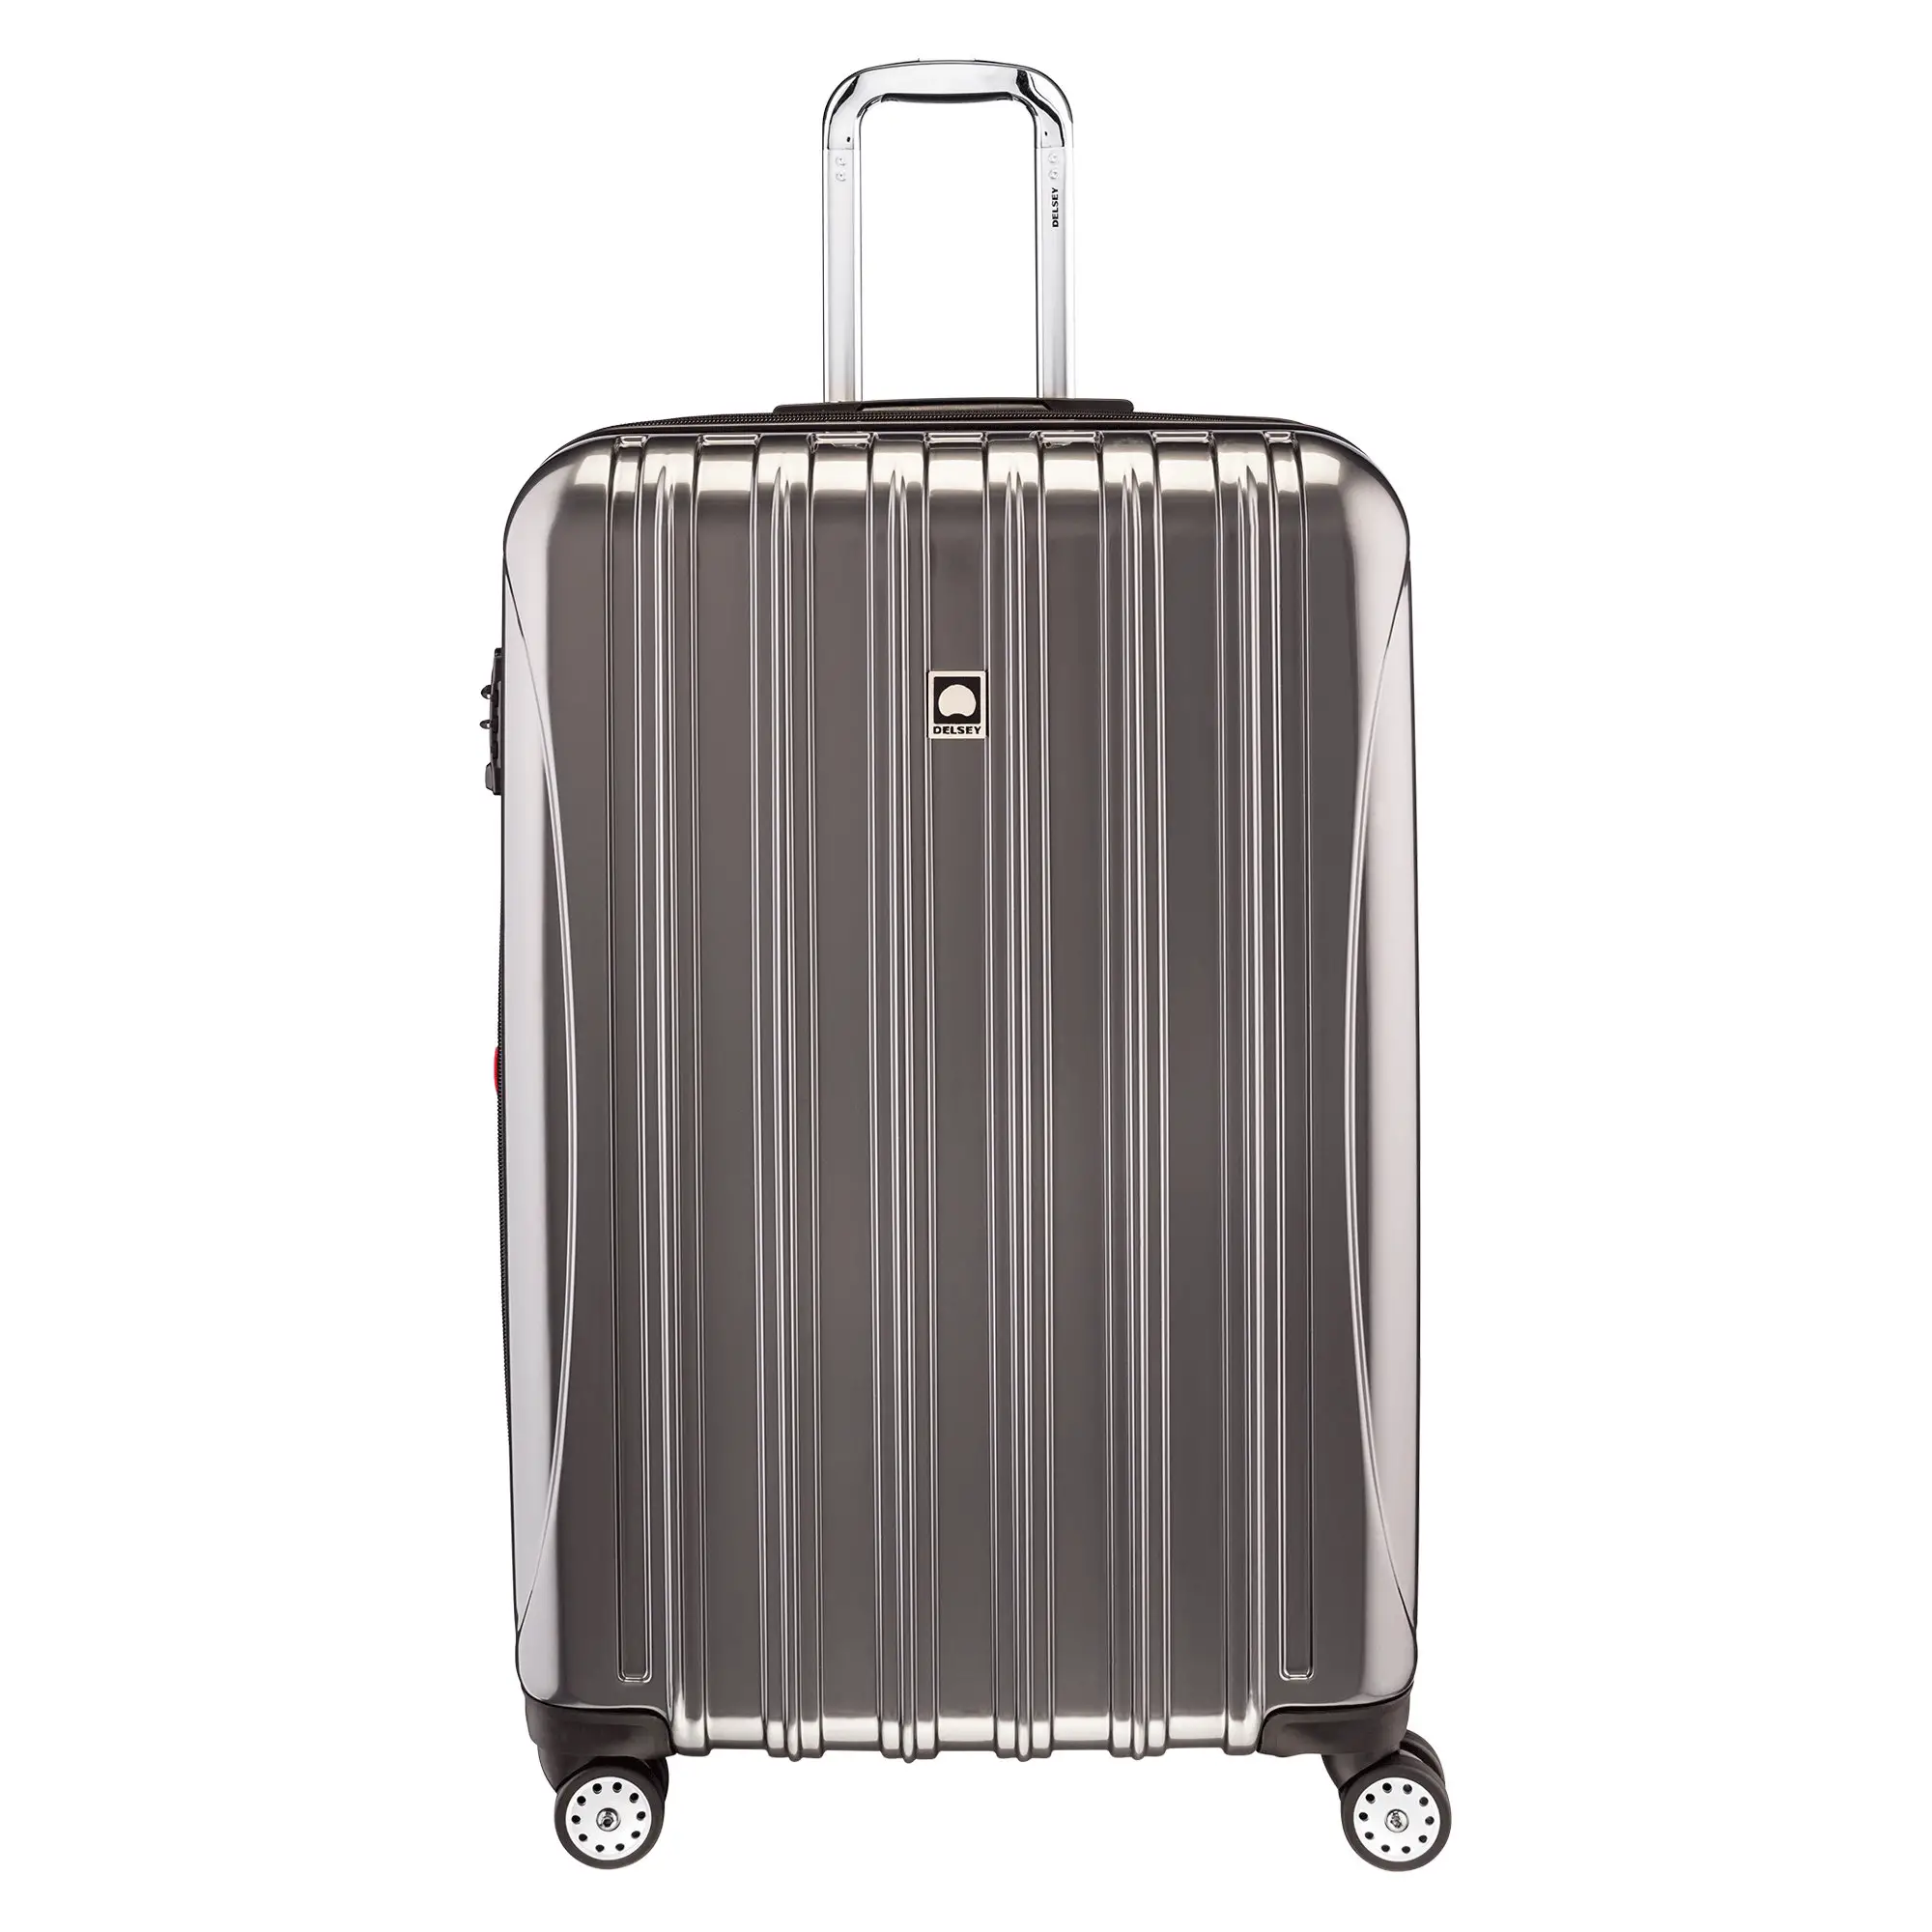 Paris Chic Style Best Travel Luggage Delsey Paris Checked Lightweight Suitcase Stylish Durable